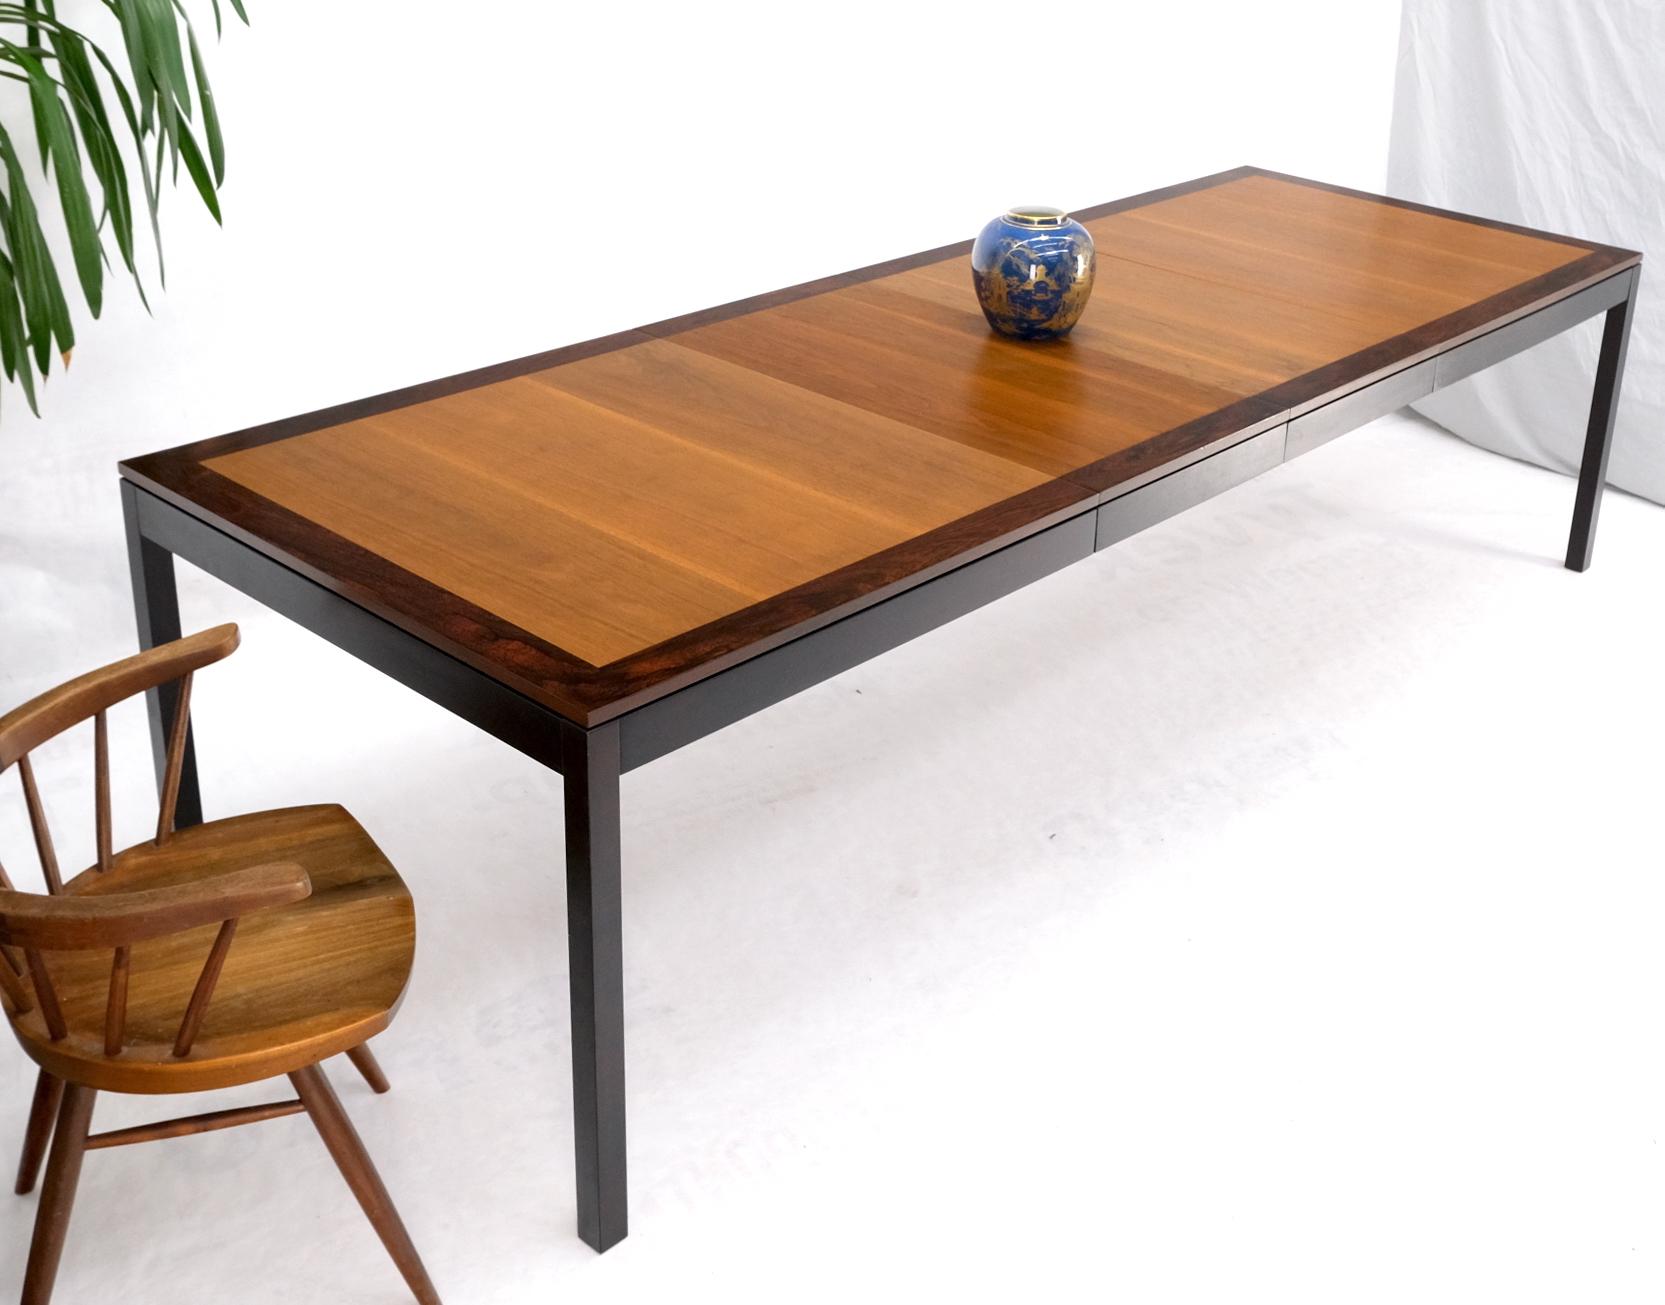 Banded rosewood & walnut rectangle dining table w/ two 20